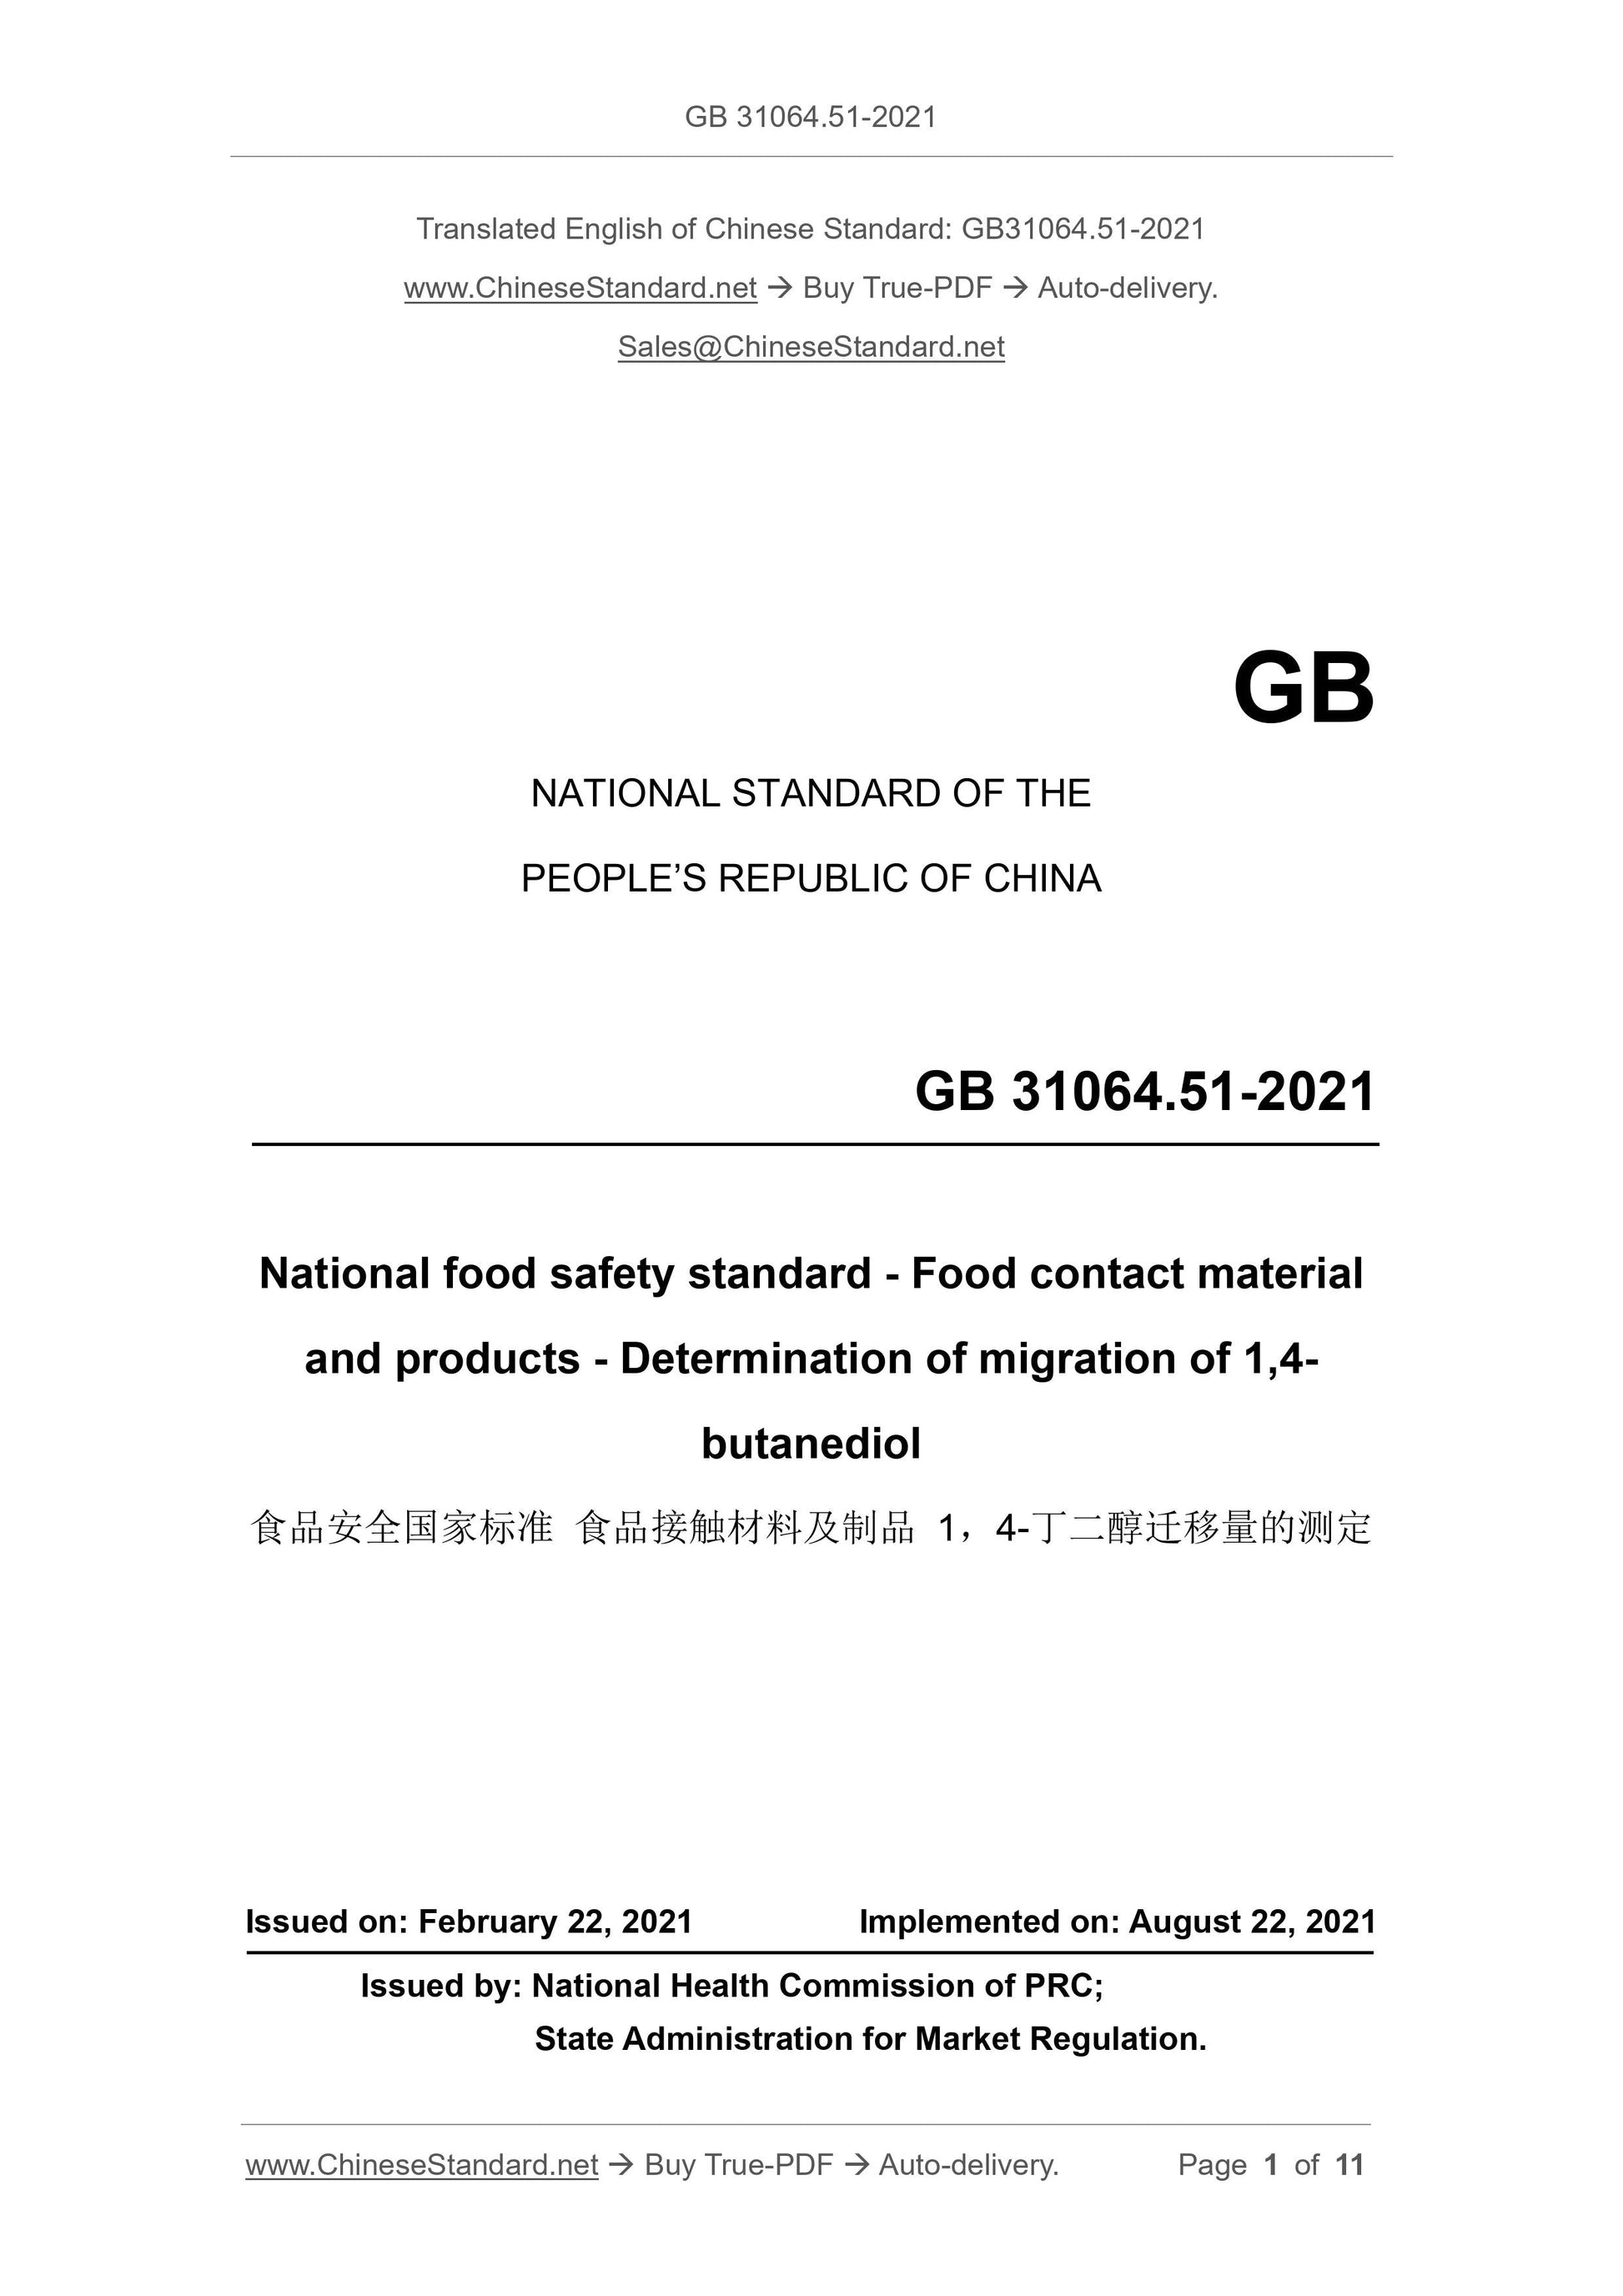 GB 31604.51-2021 Page 1